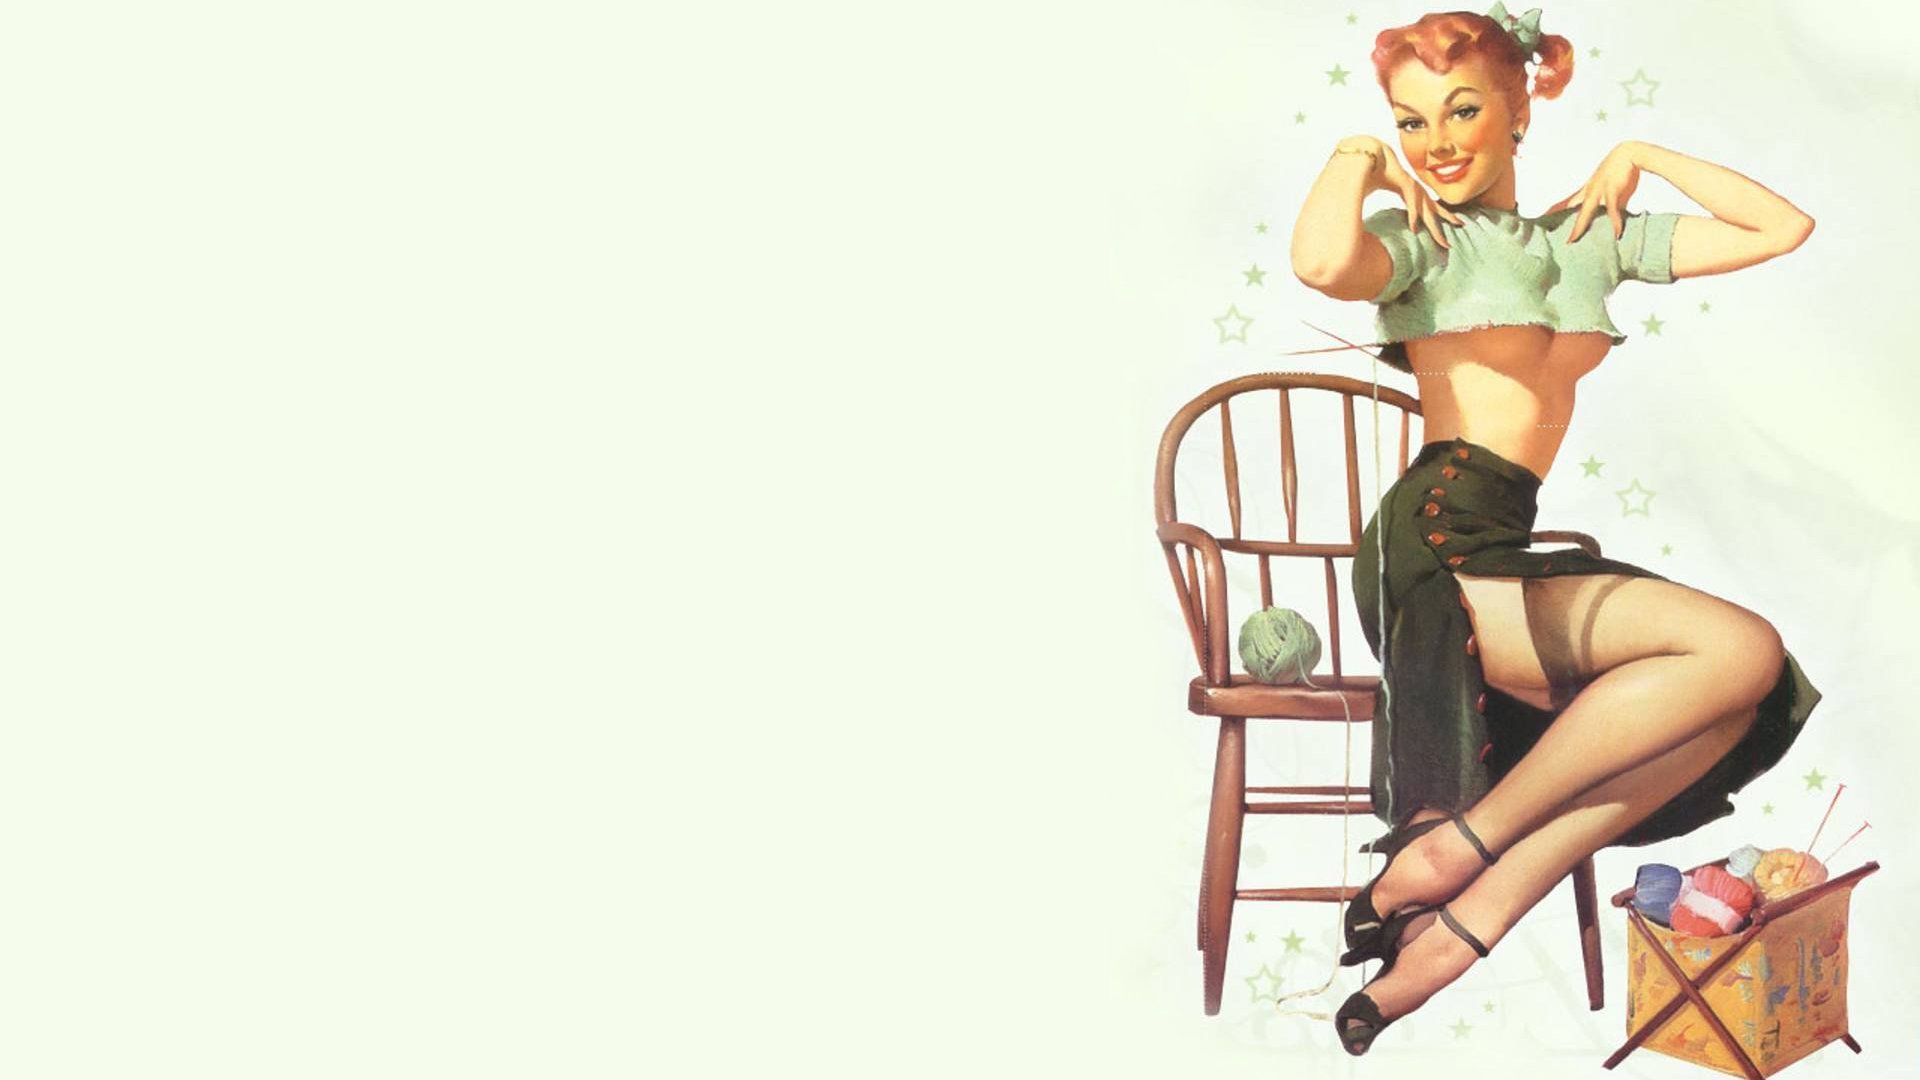 47+] Free Pin Up Girl Wallpapers on